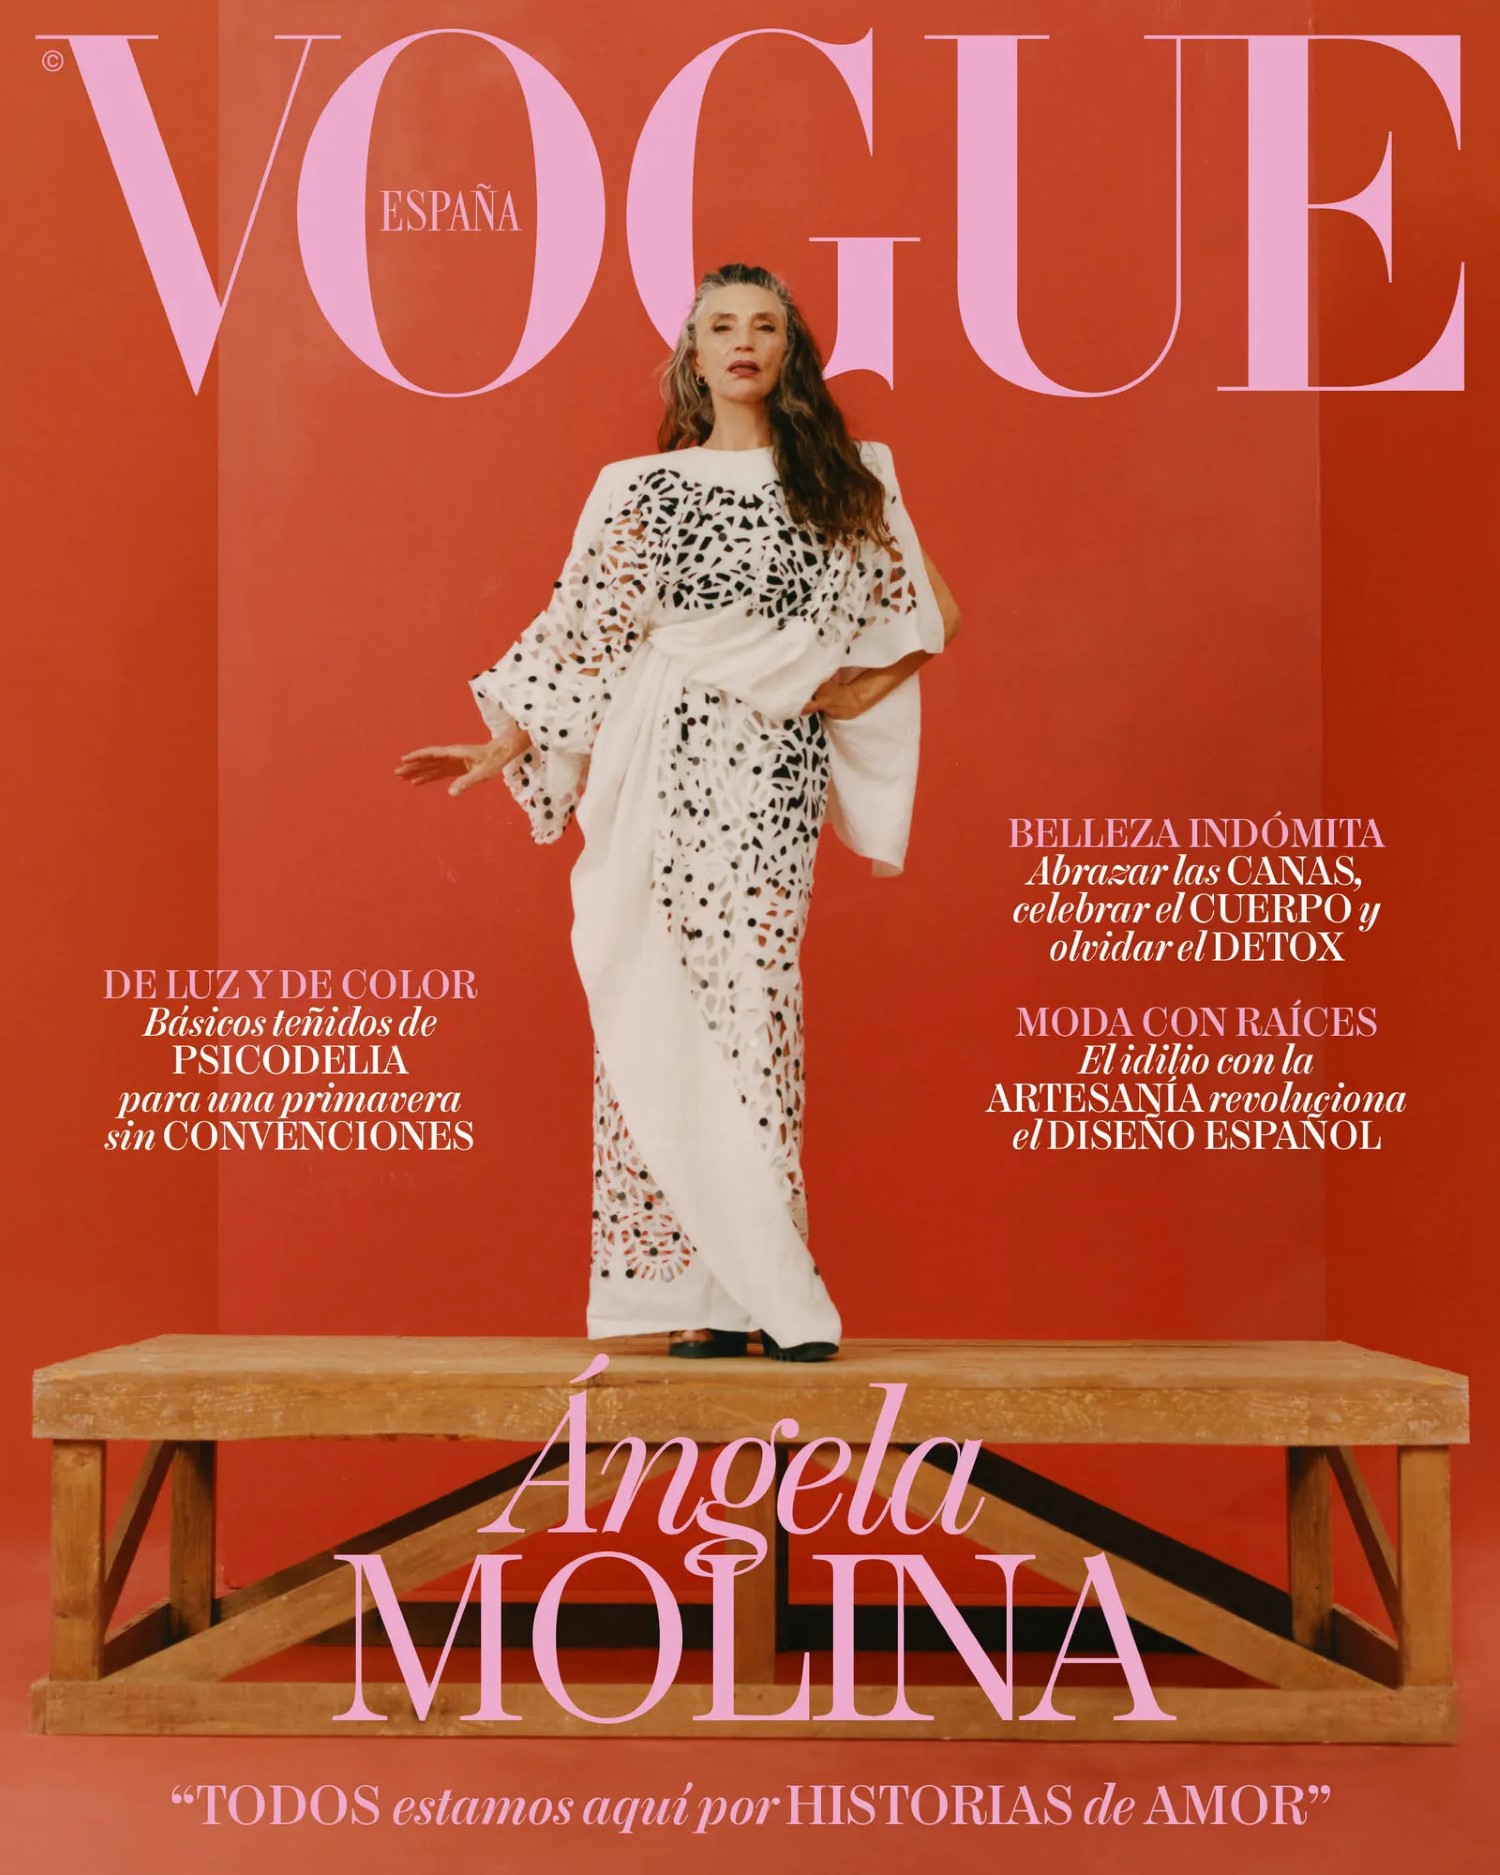 Ángela Molina covers Vogue Spain May 2022 by Camila Falquez